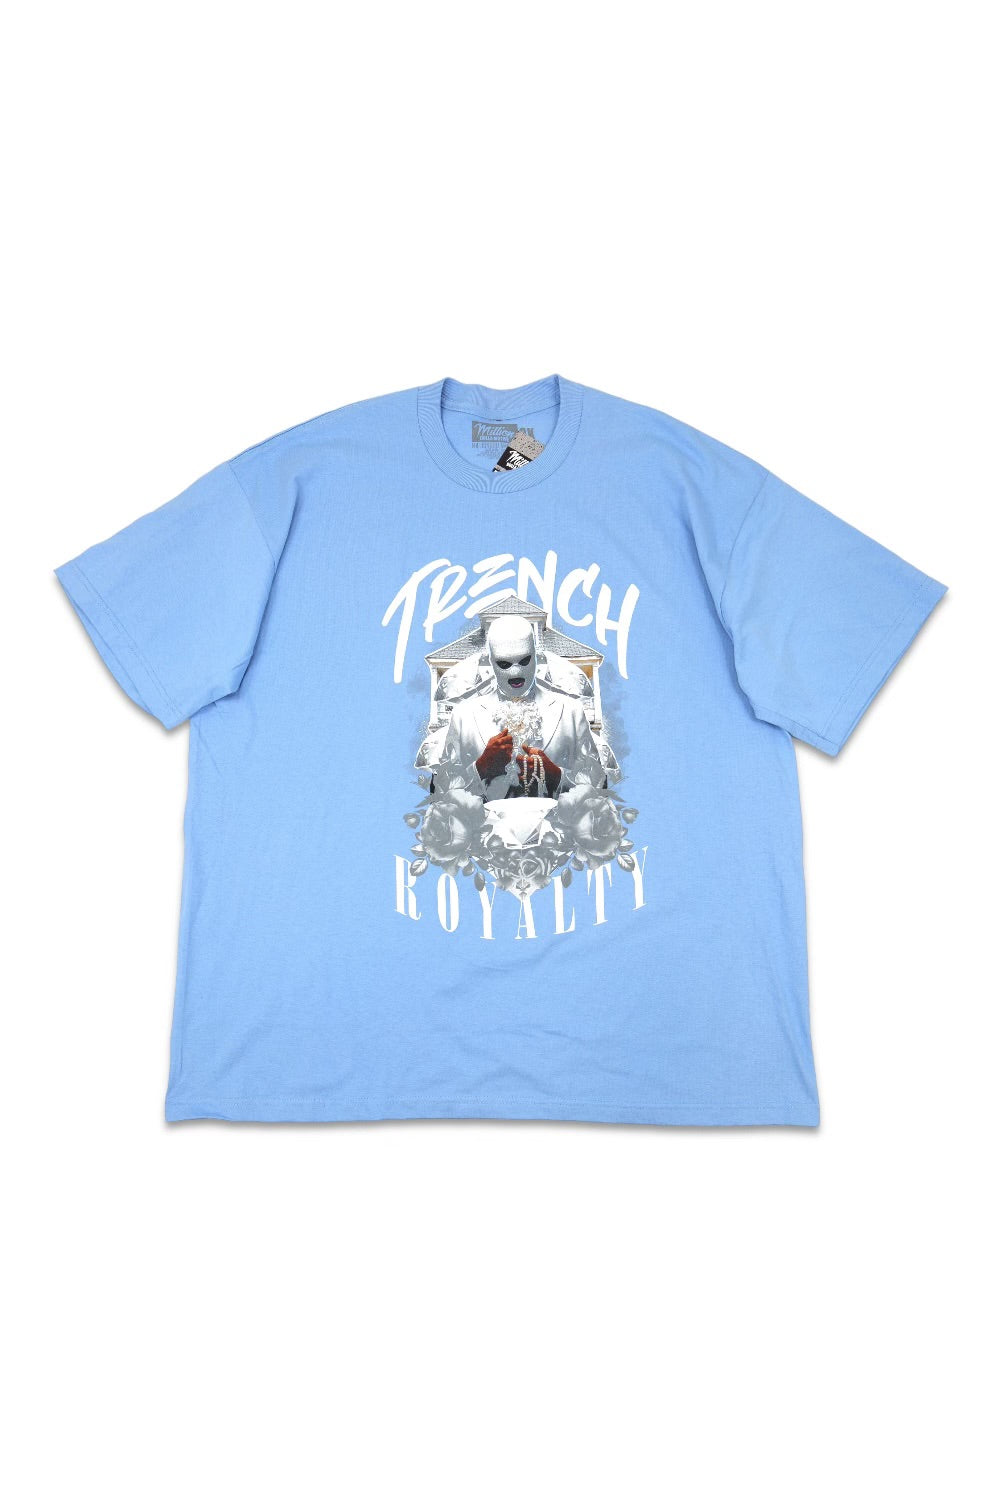 Graphic Tees  - Trench Royalty T - Shirts